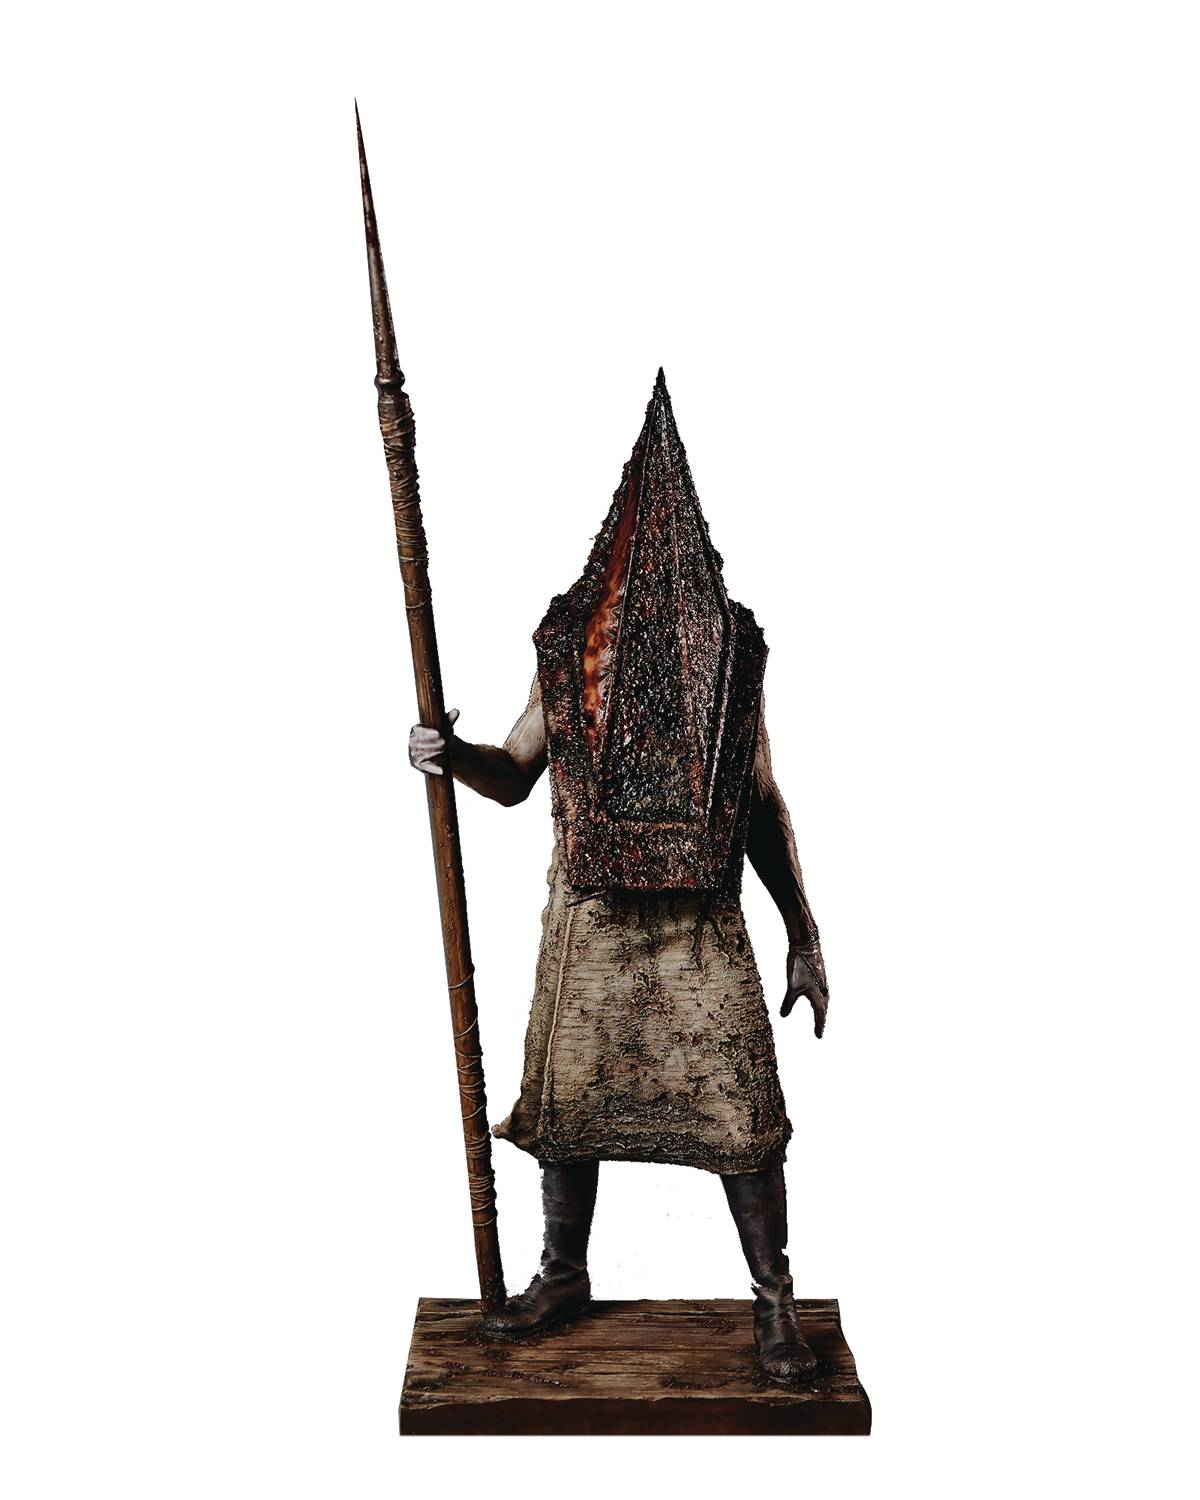 Silent Hill 2: Needs more Pyramid Head – The Mask of Reason